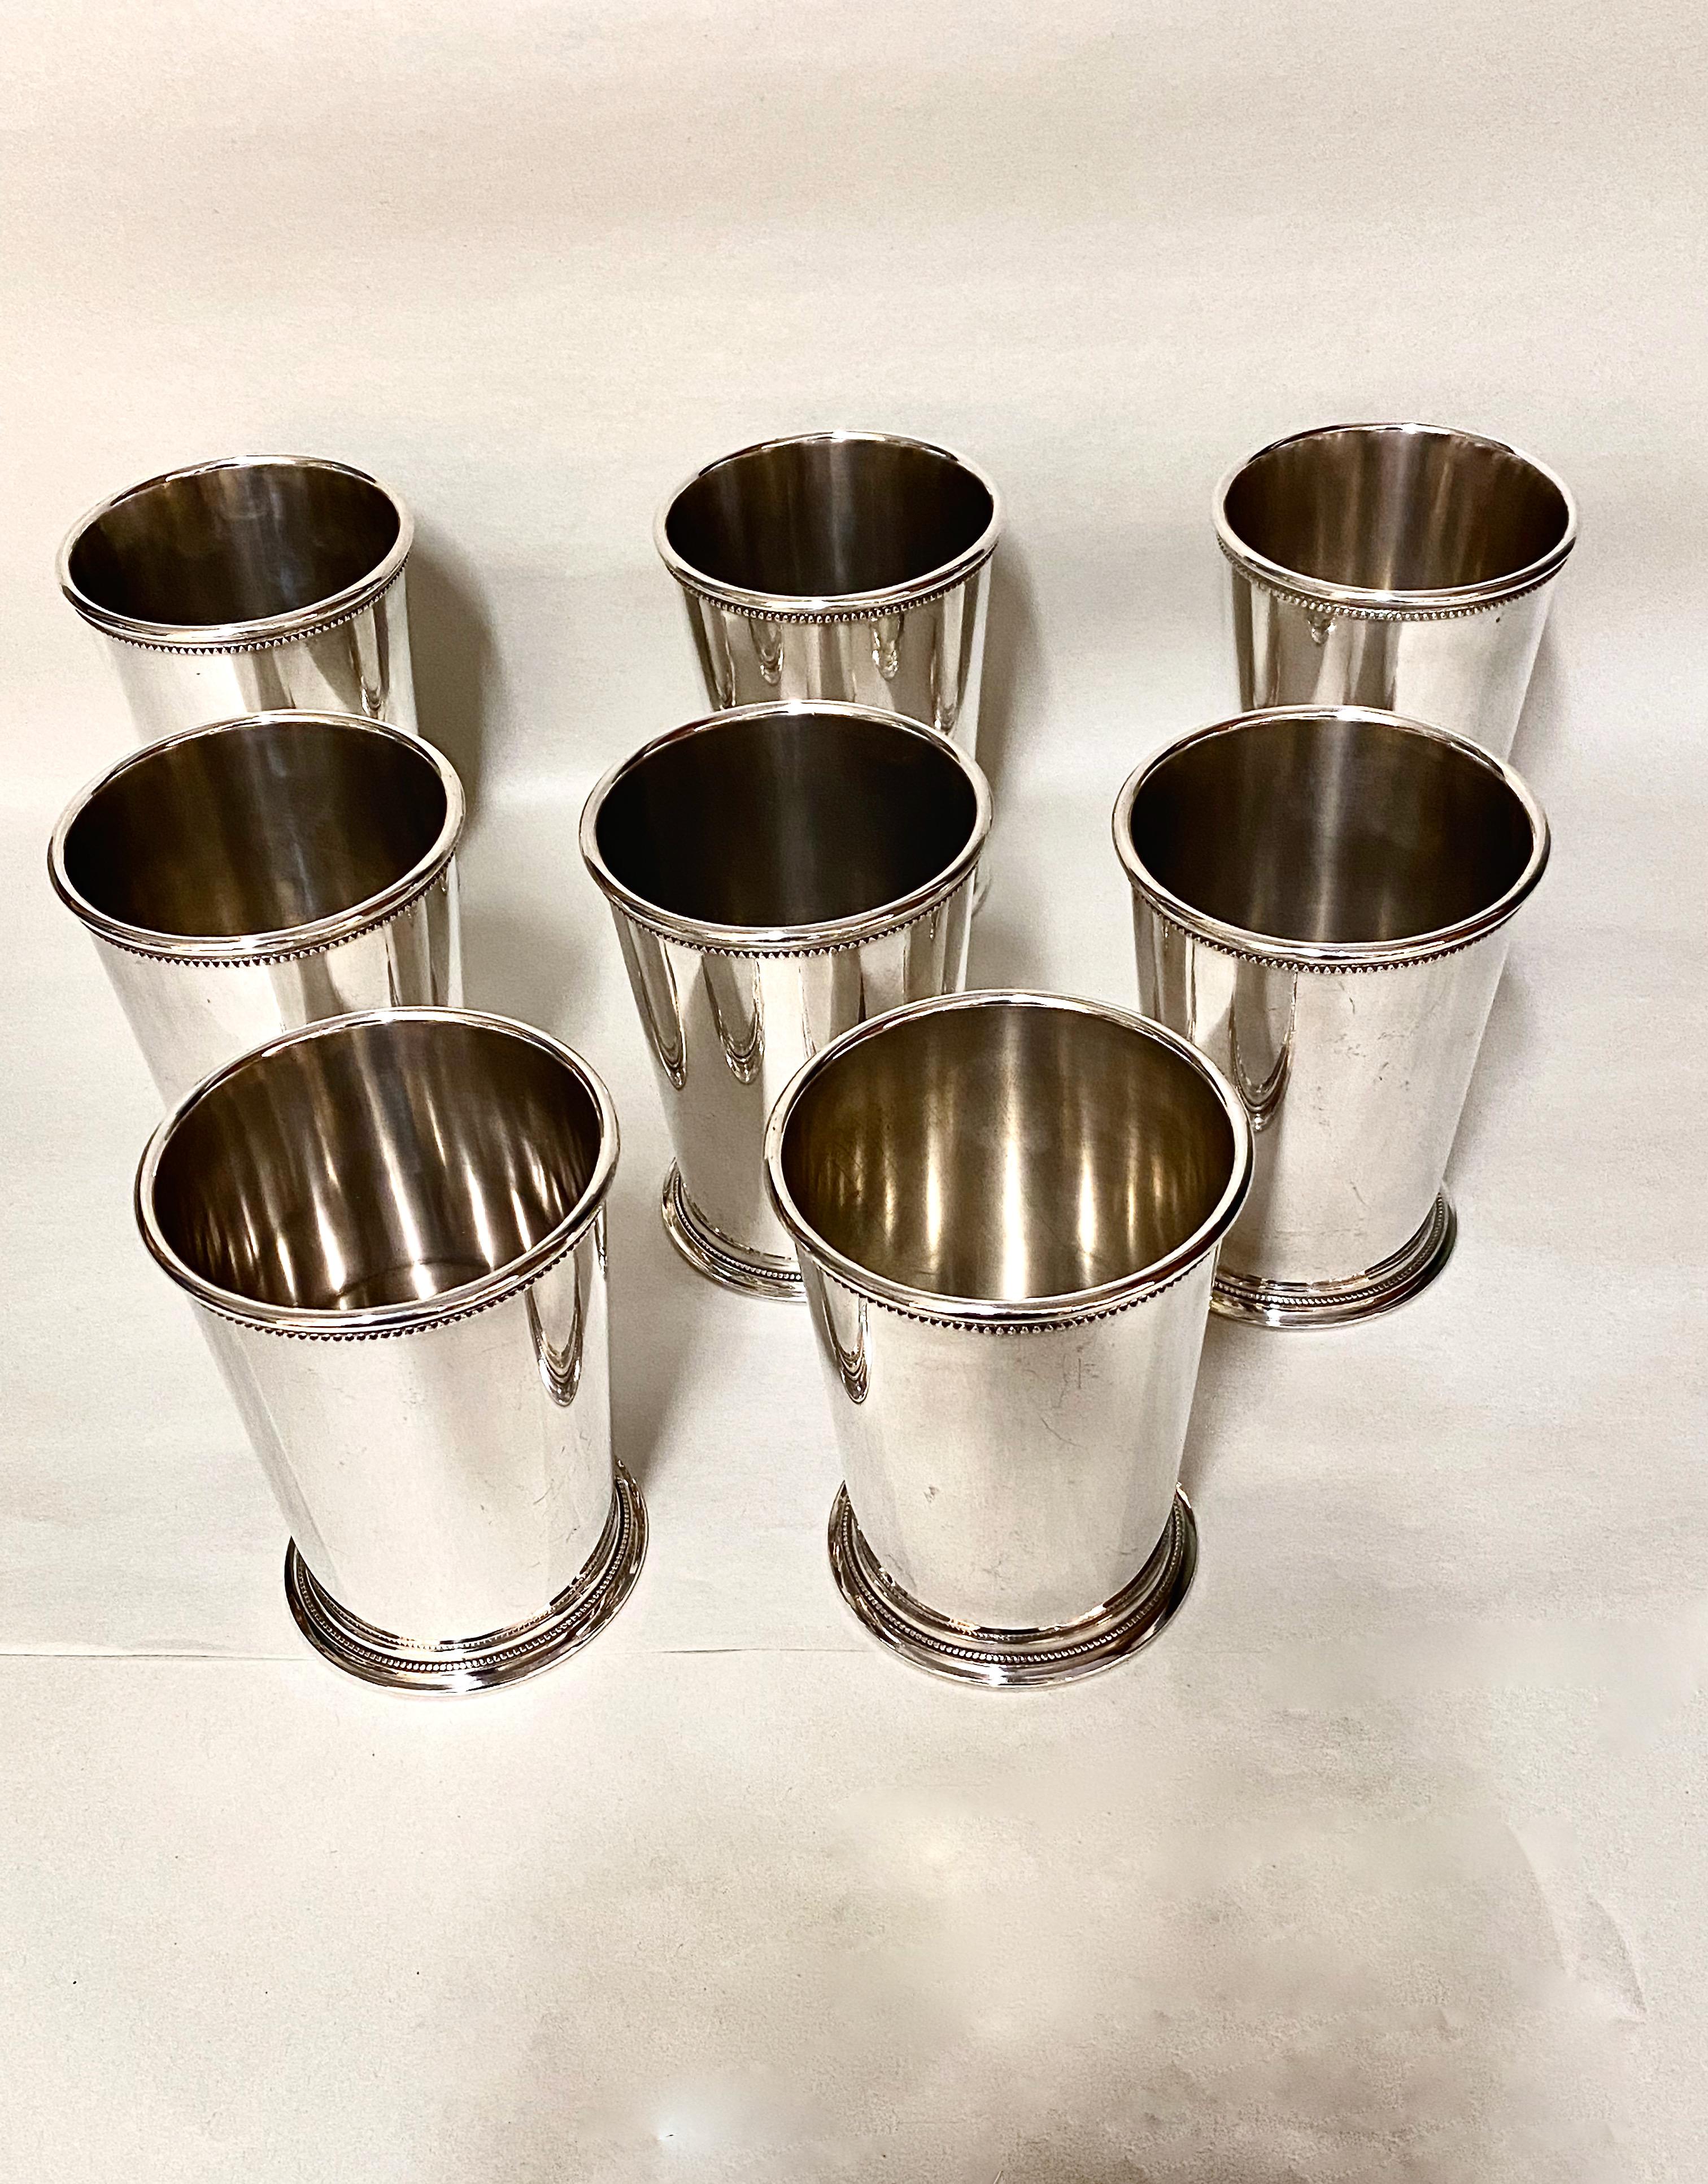 Silver Plate Set of 8 Mid-20th Century Mint Juleps